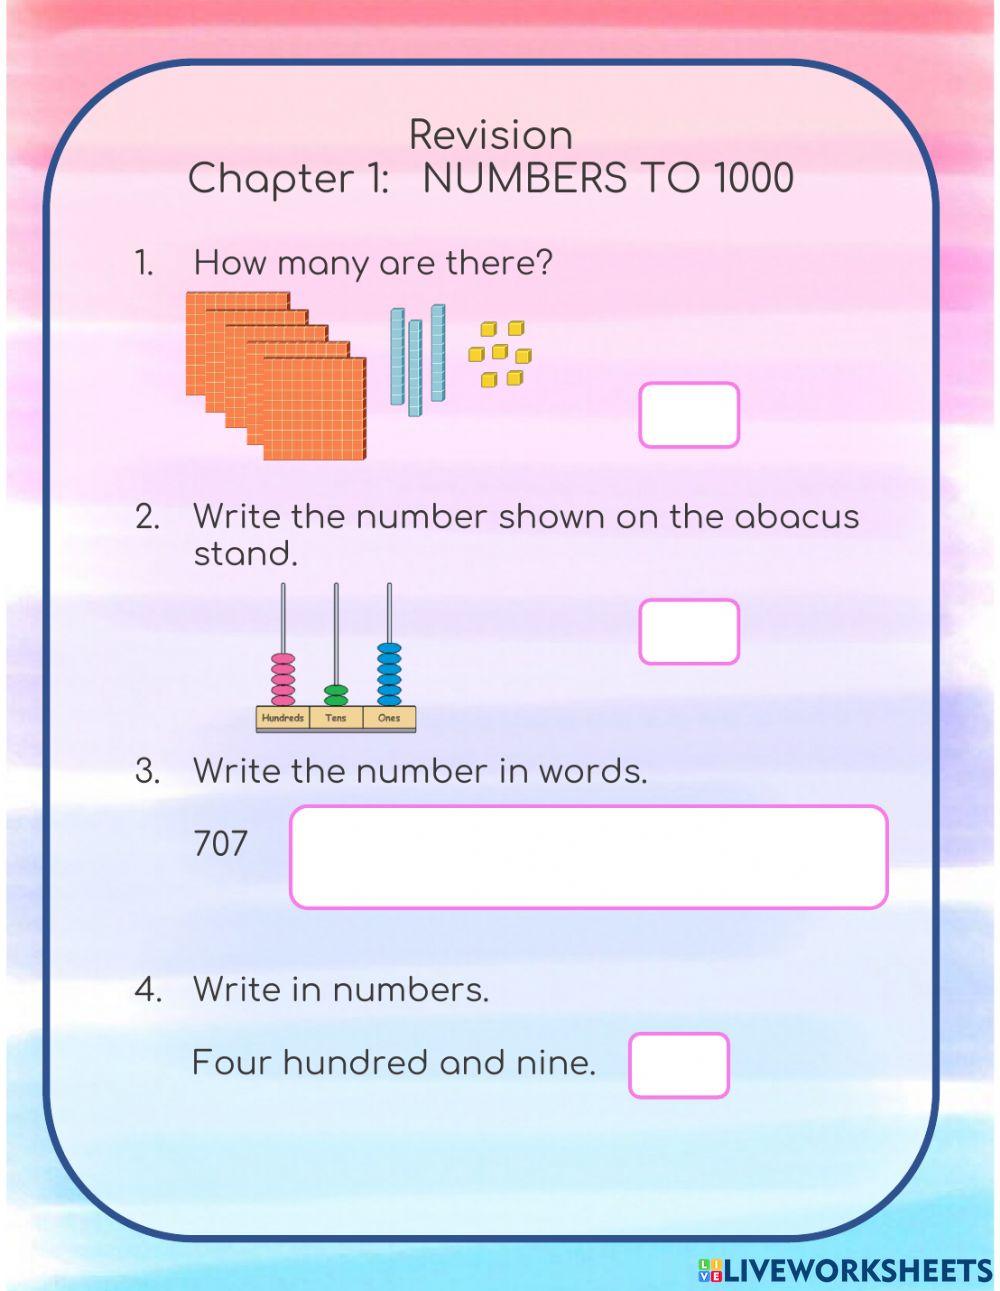 Revision 1 Numbers to 1000